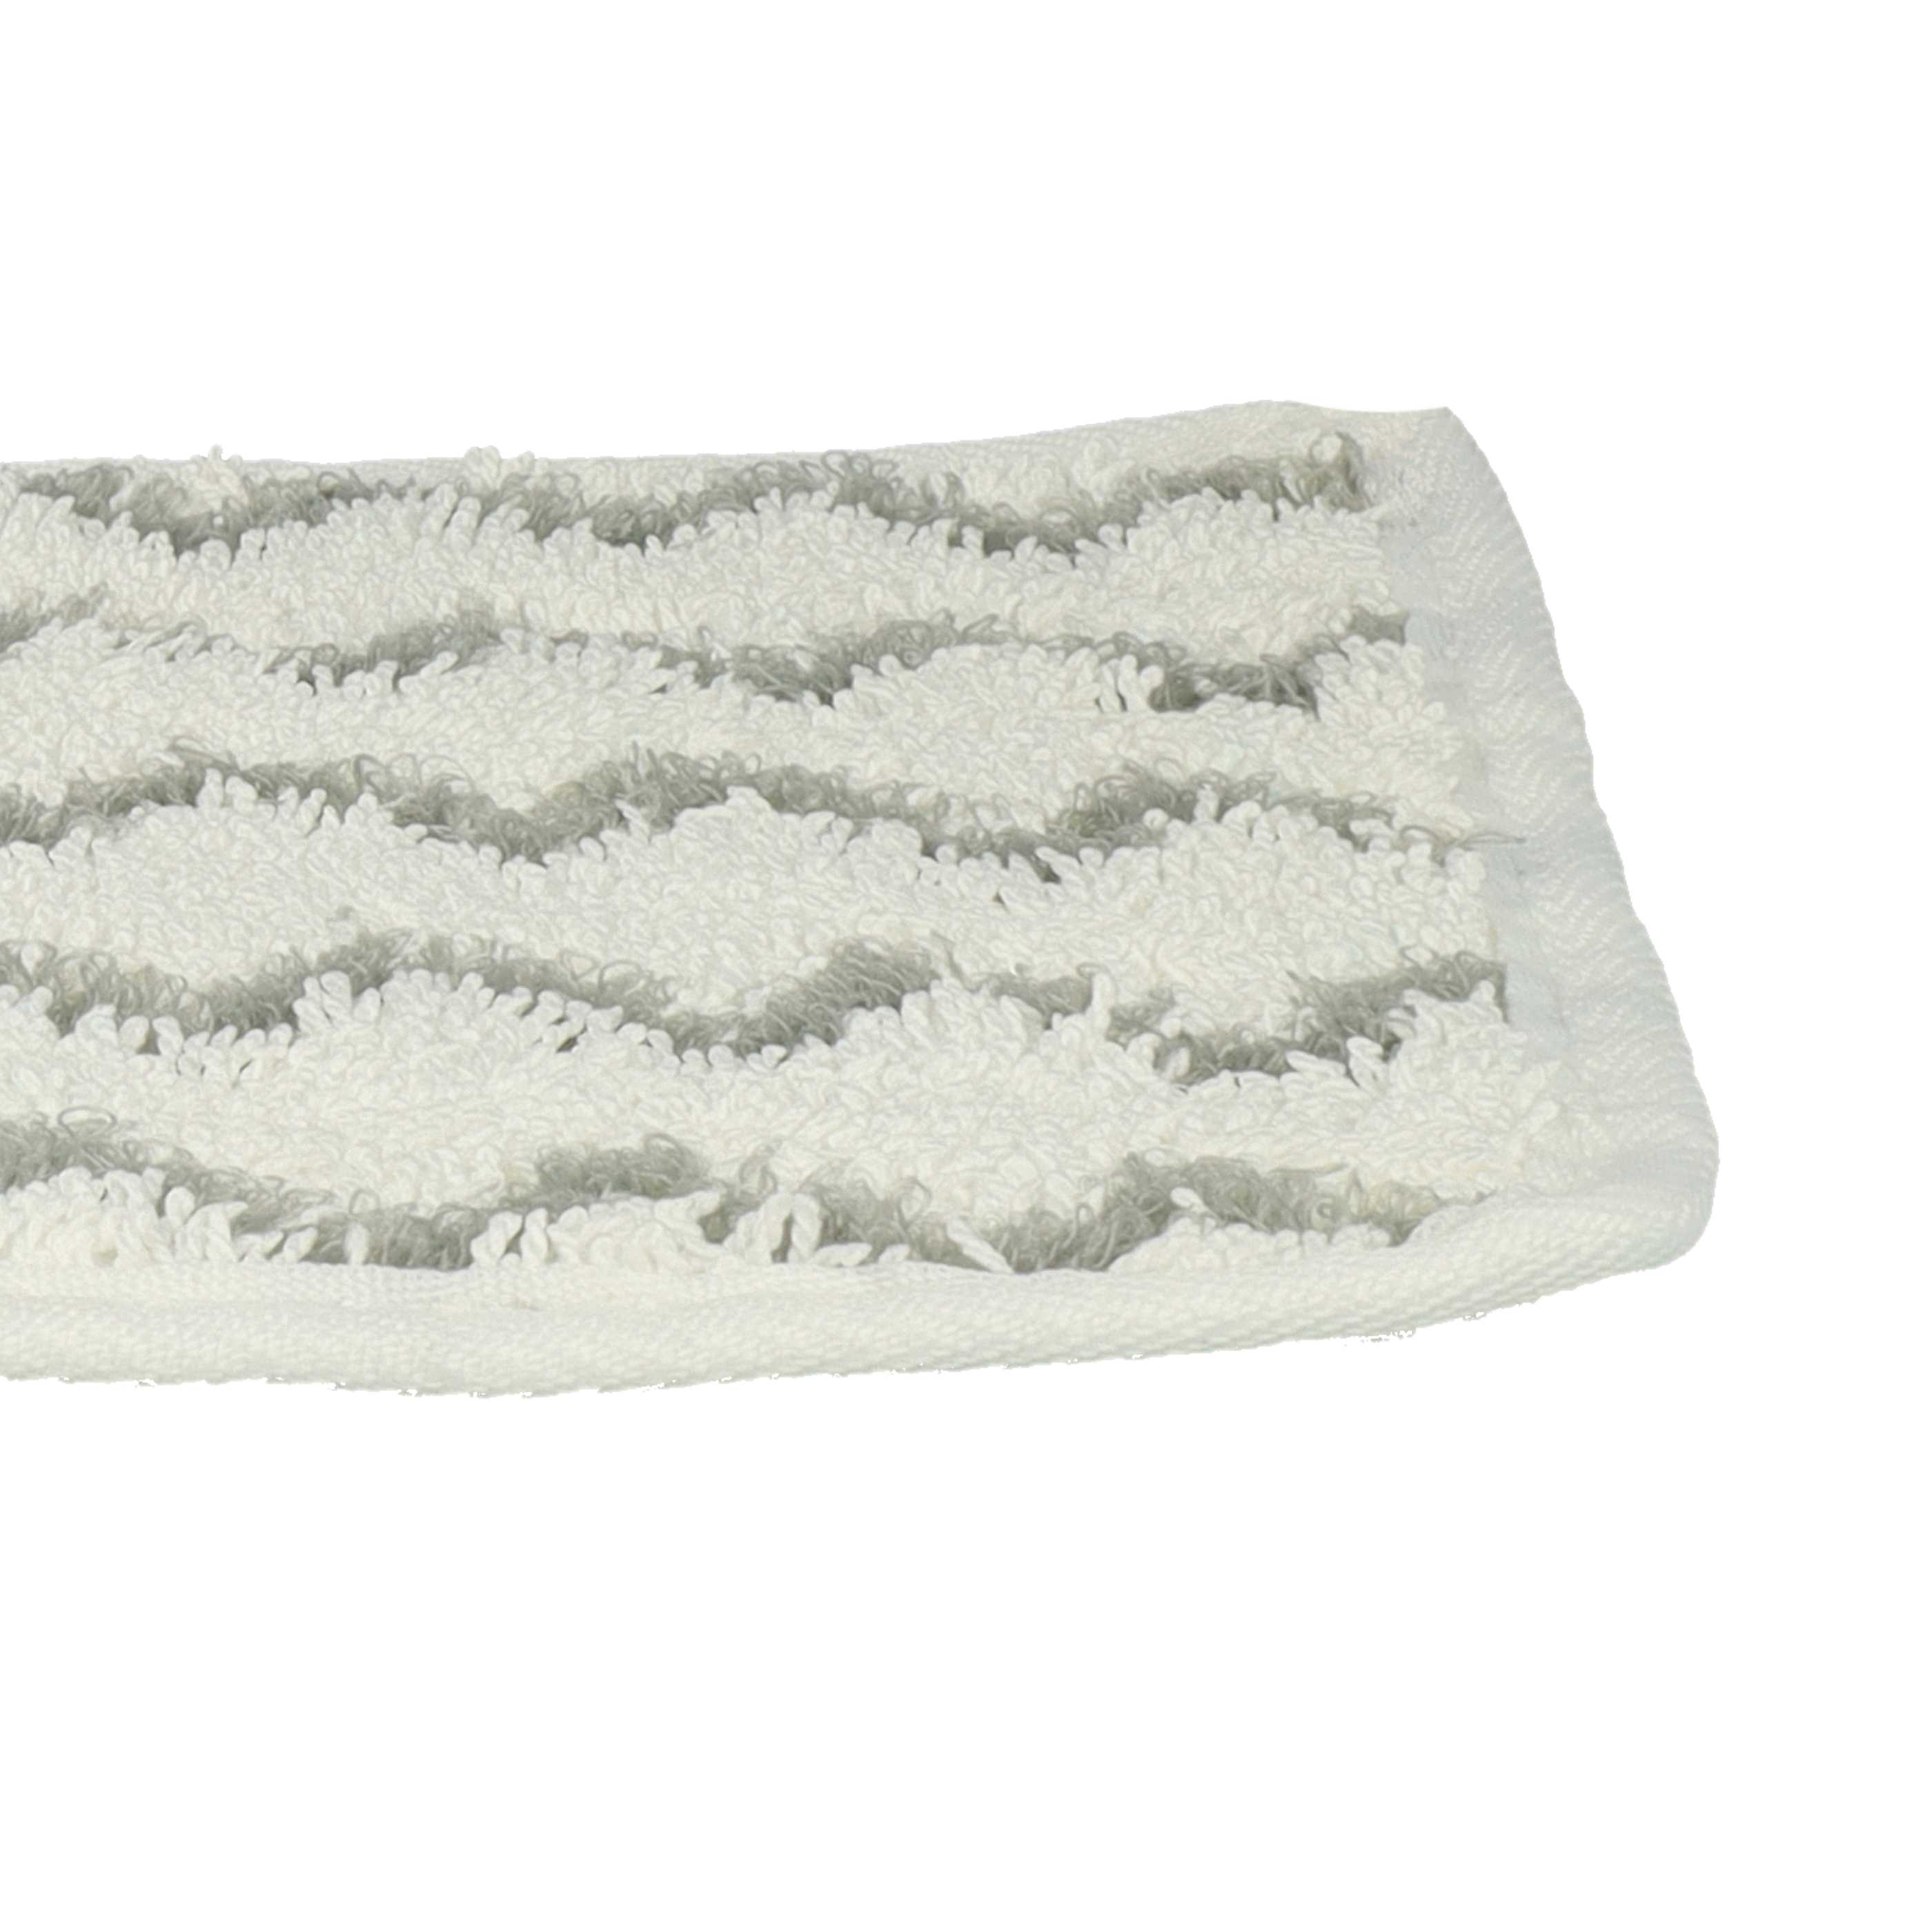 2x Cleaning Pad replaces Vileda 161717 for ViledaHot Spray Steamer, Steam Mop - Microfibre Grey White